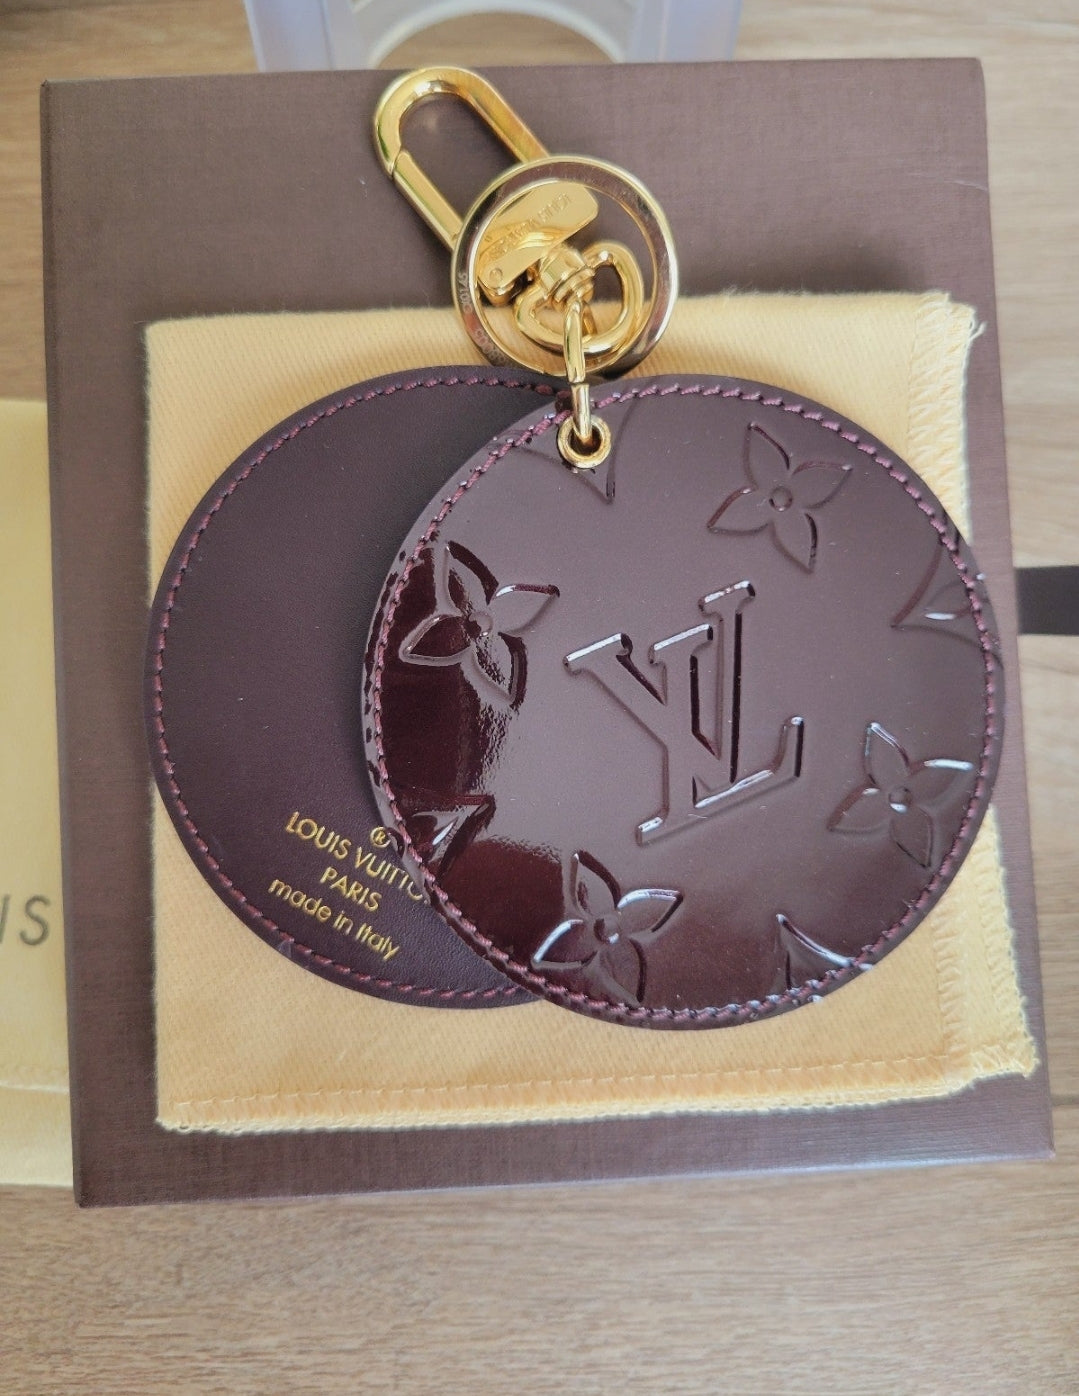 BRAND NEW Louis Vuitton Vernis Round Mirror Bag and Key Charm